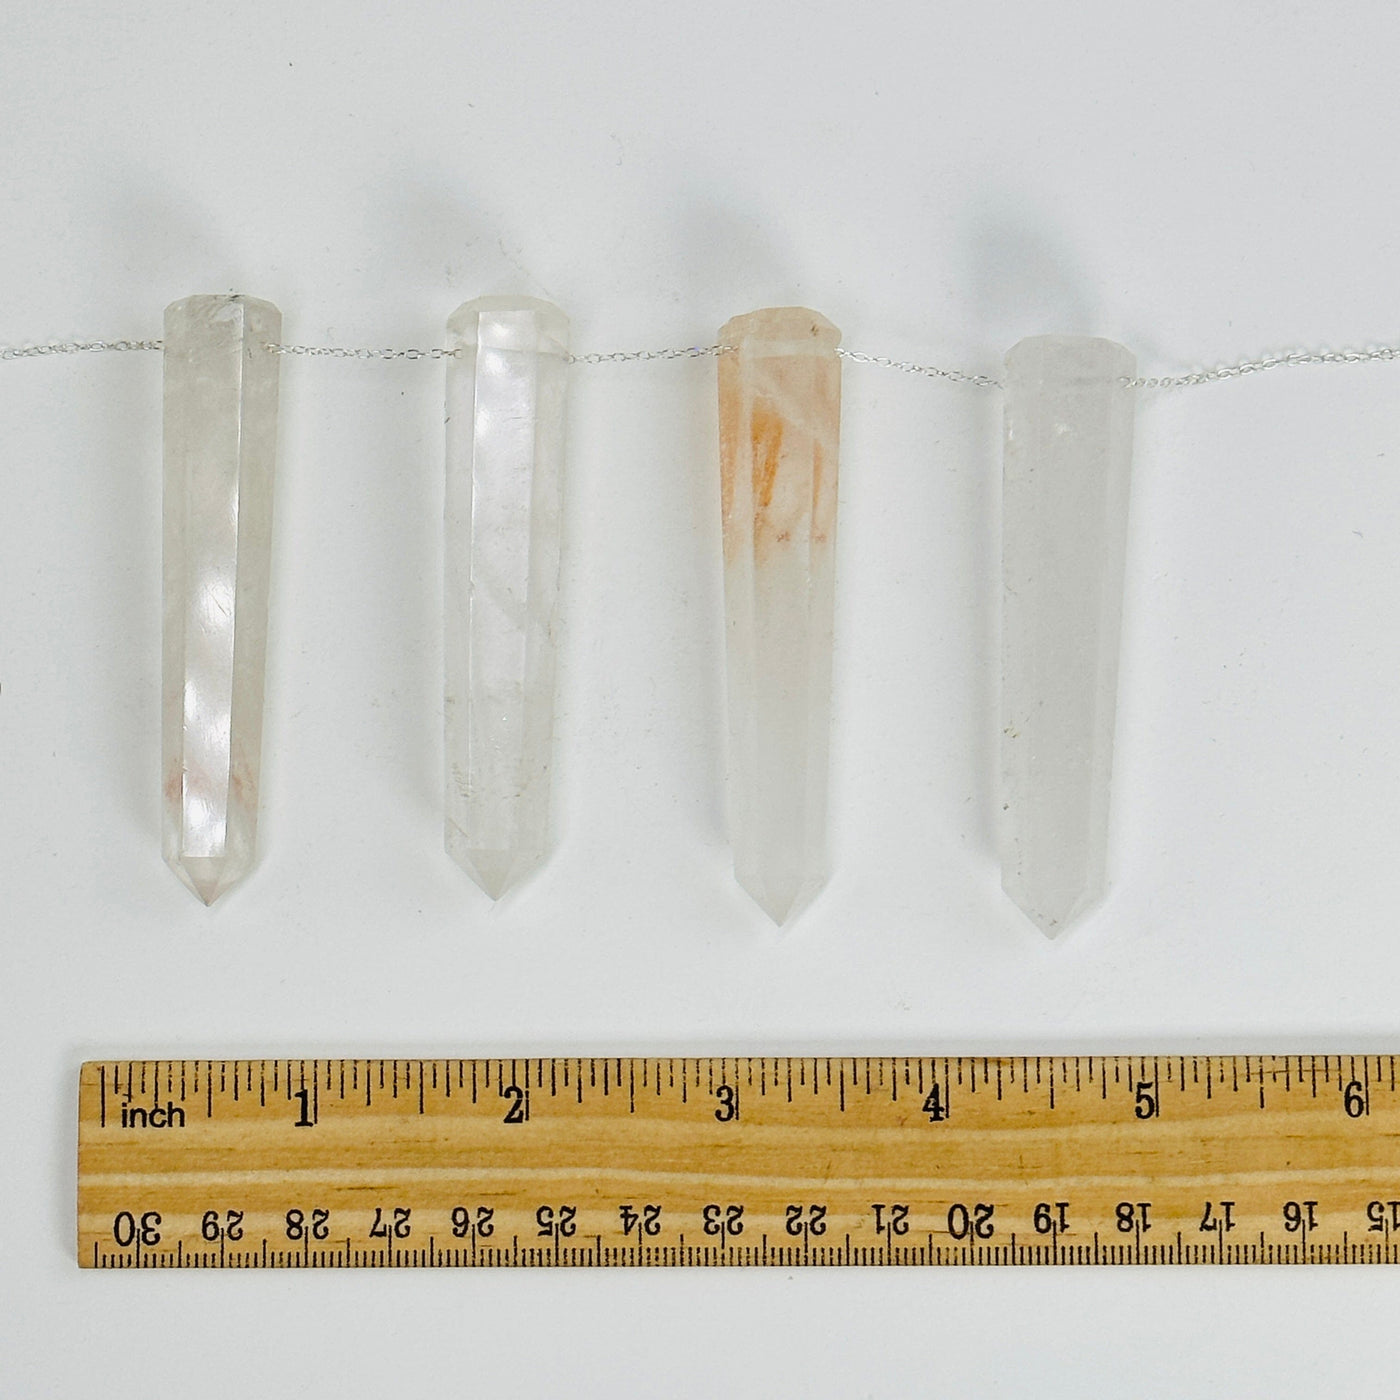 crystal quartz thin obelisks drilled with a chain through them next to a ruler for size reference